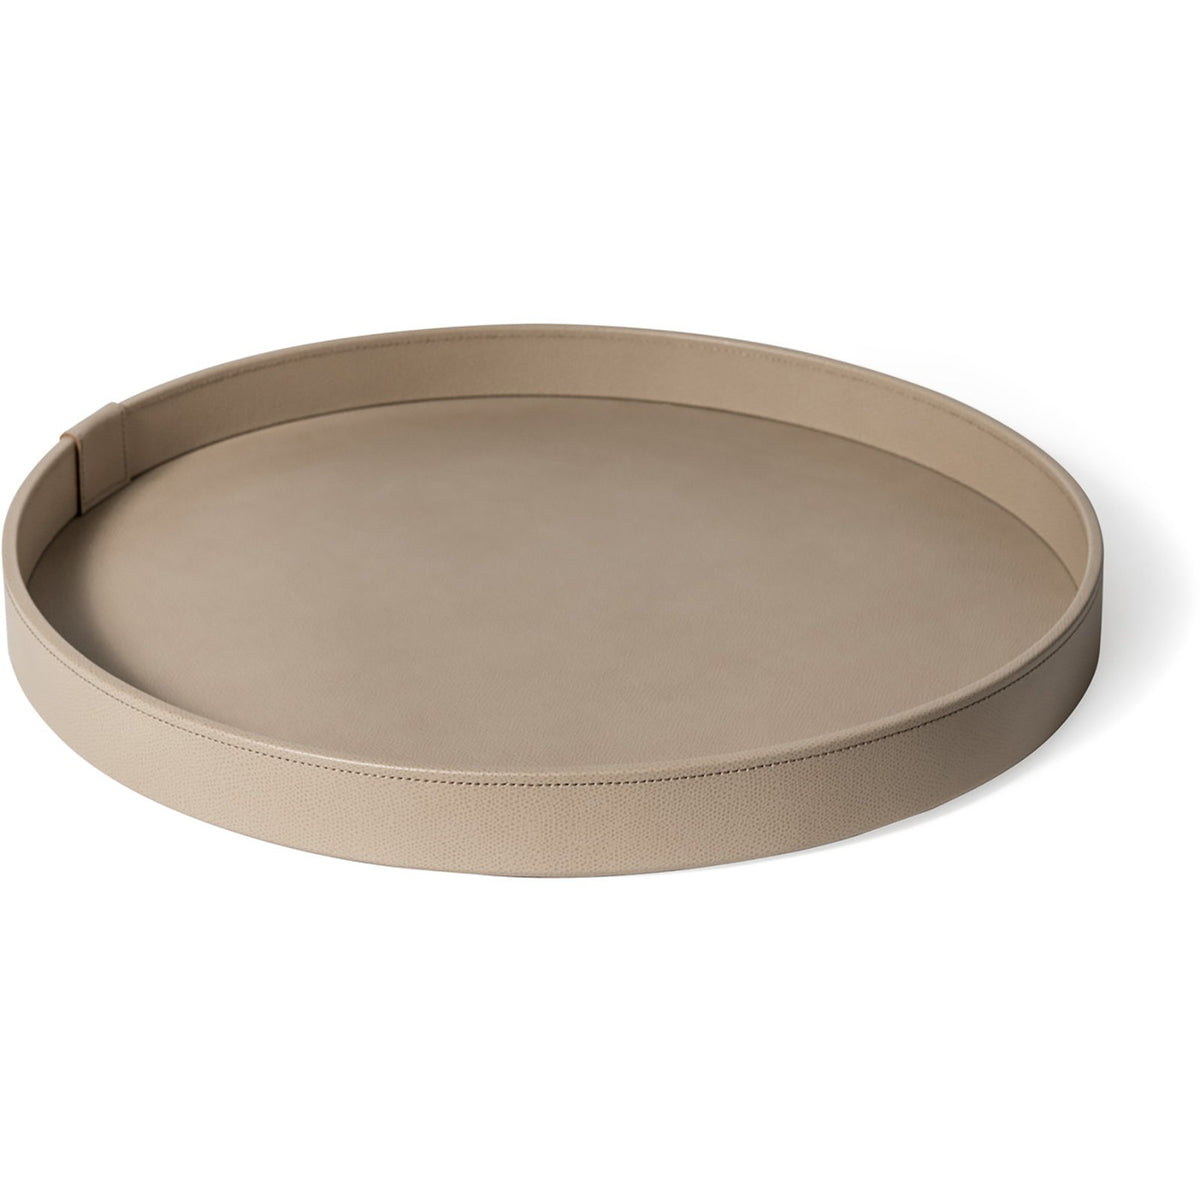 Gea Large Round Tray, Taupe